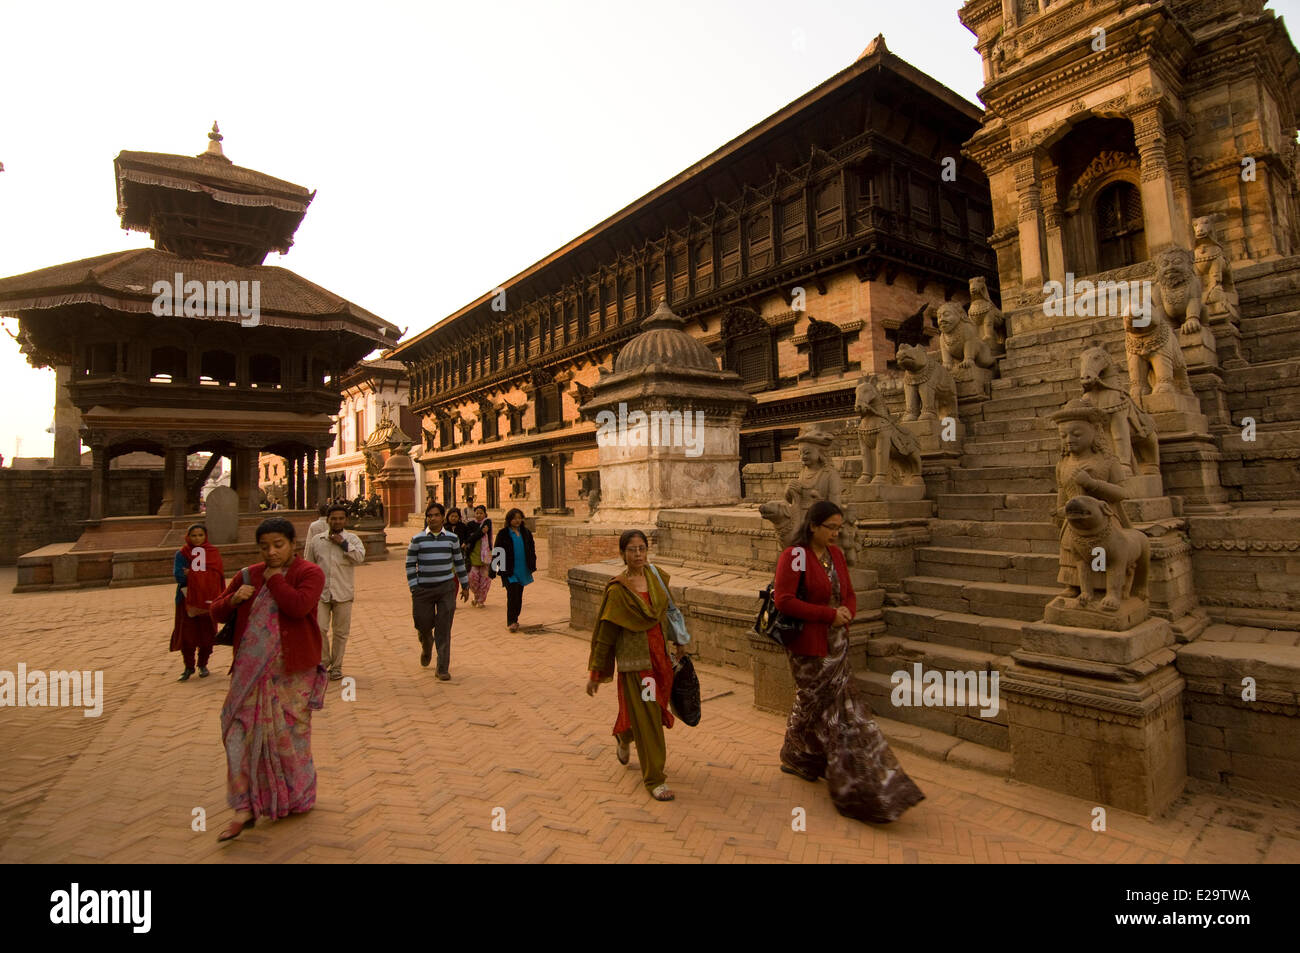 Nepal Kathmandu Valley Listed World Heritage By Unesco Bhaktapur Or Bhadgaon Ancient Royal